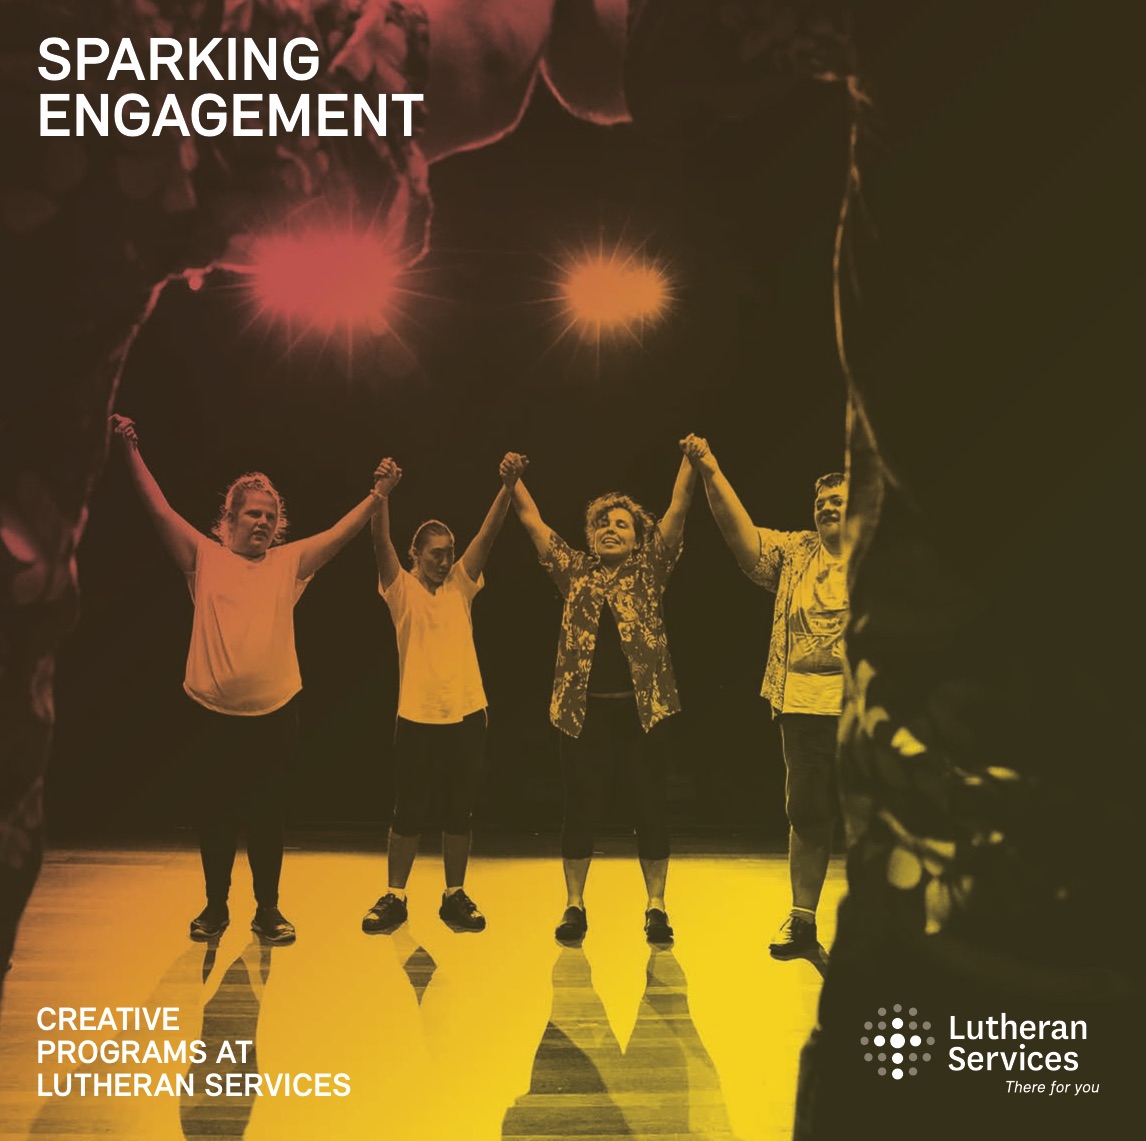 Sparking engagement: creative engagement programs at Lutheran Services